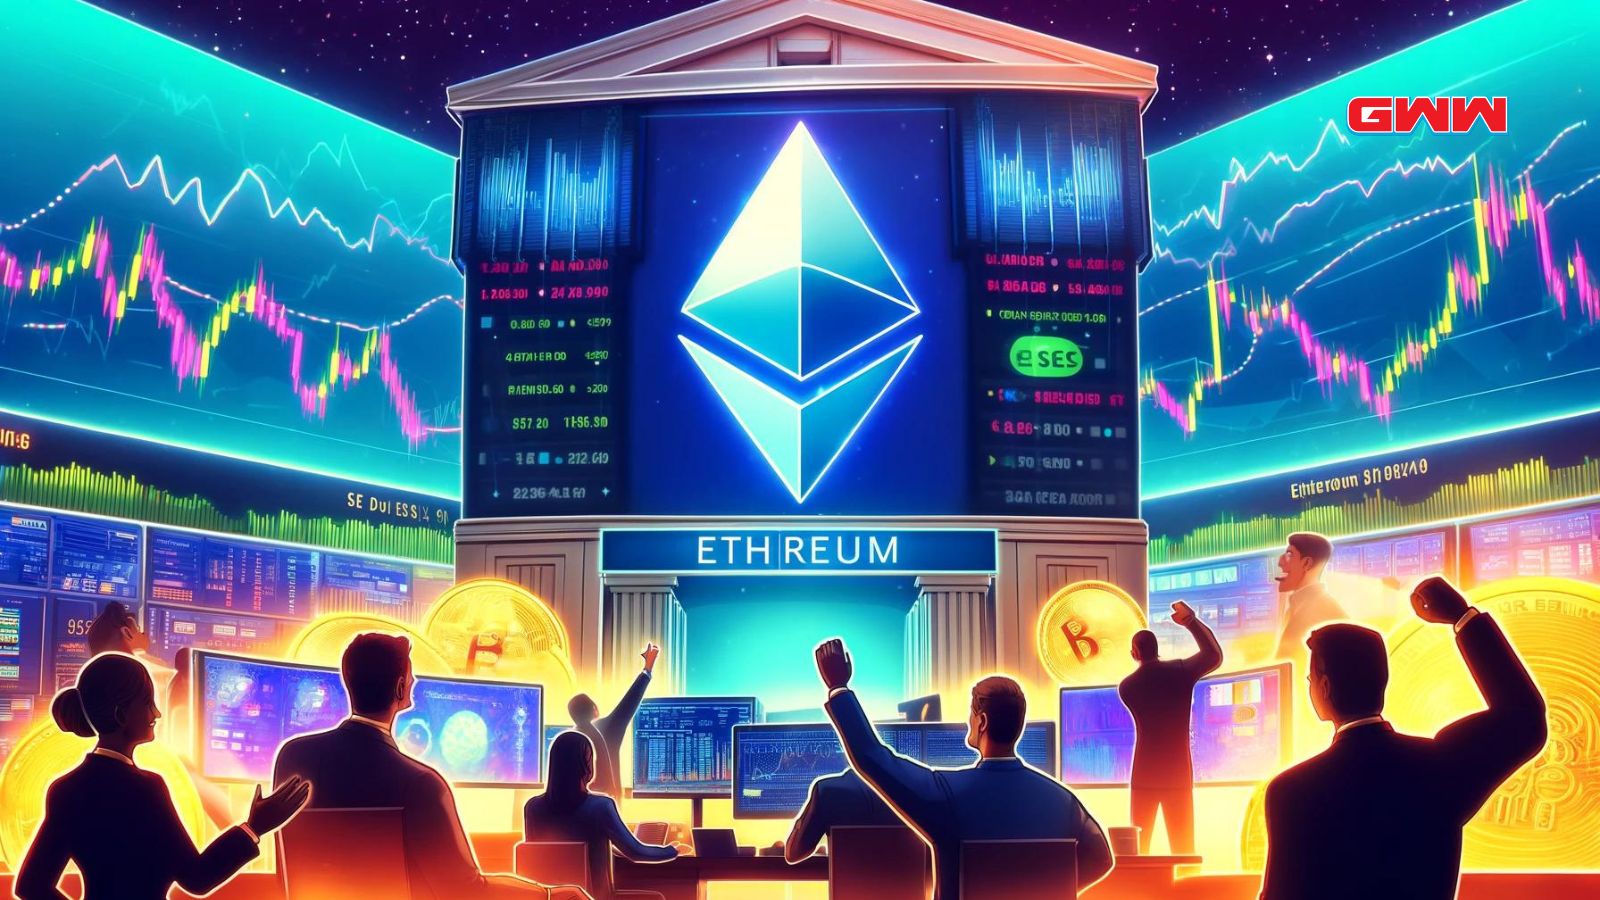 A vibrant financial scene celebrating the SEC's approval of Ethereum ETF applications